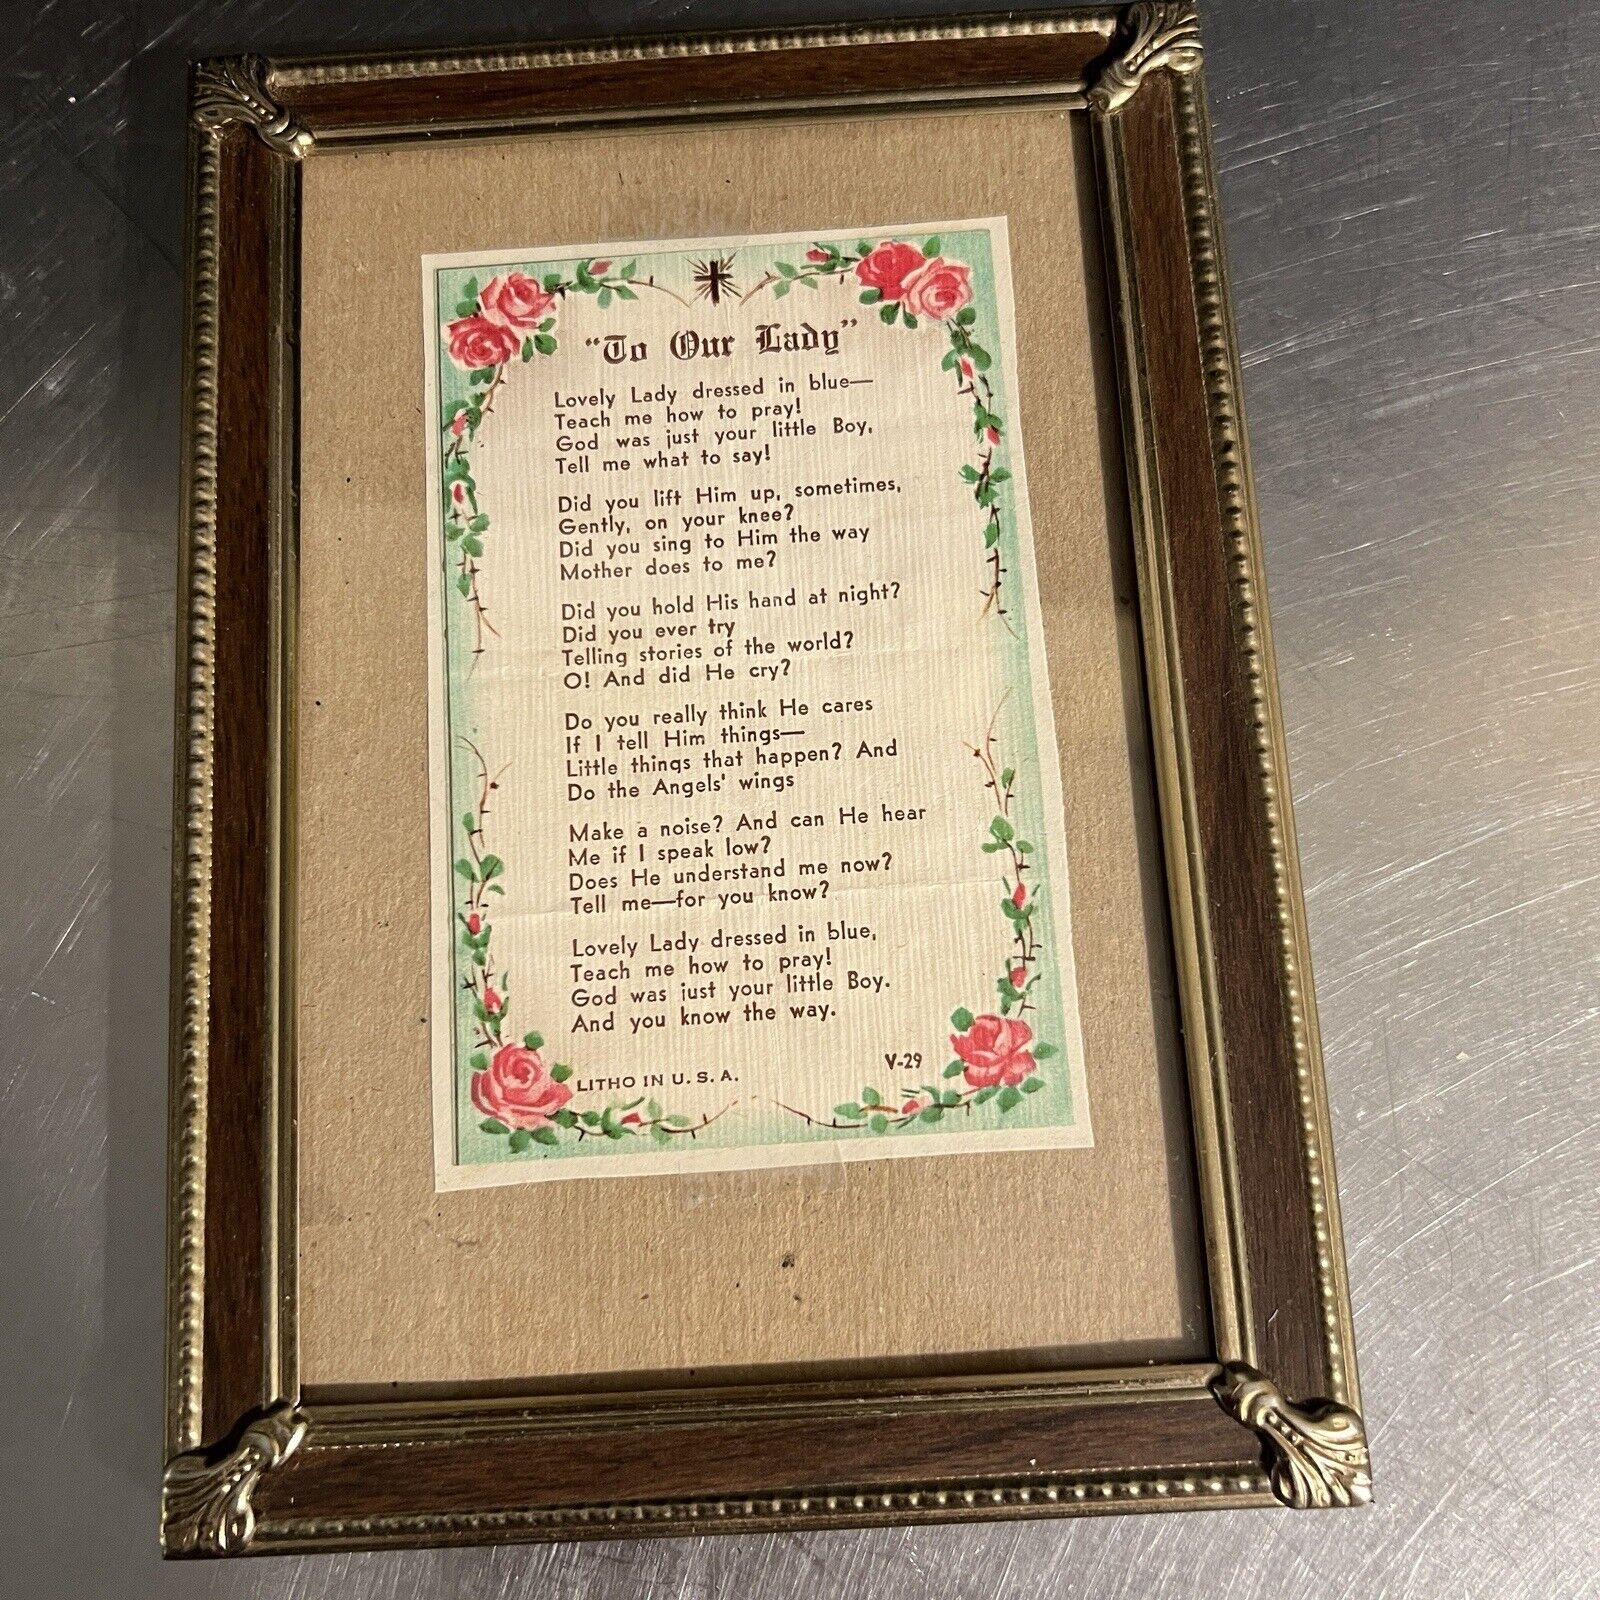 VTG Framed Prayer Blessed Mother Mary To Our Lady Religious Catholic Gift USA